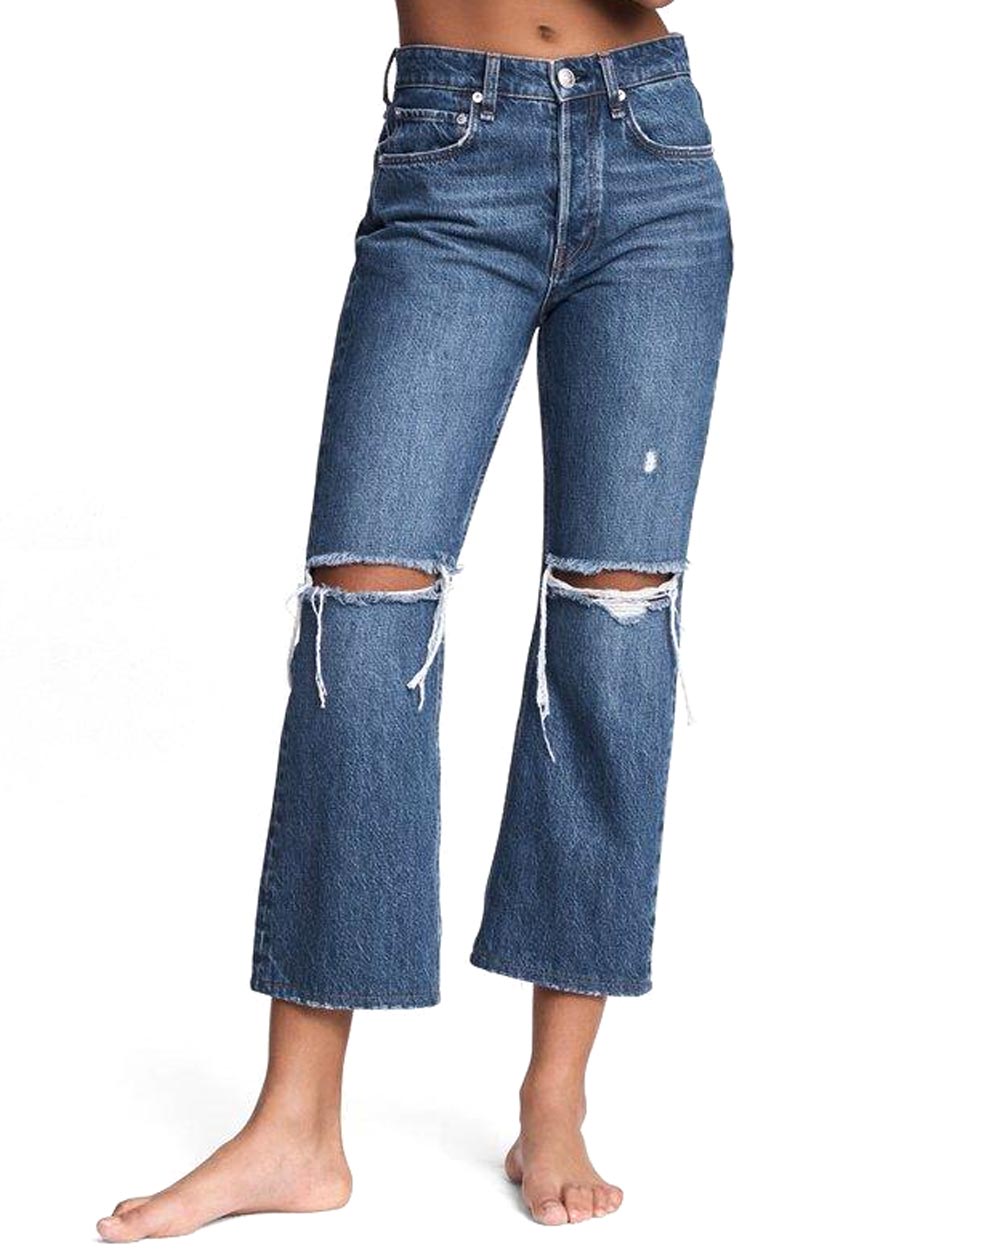 Maya High Rise Cropped Flare Jean in Emory